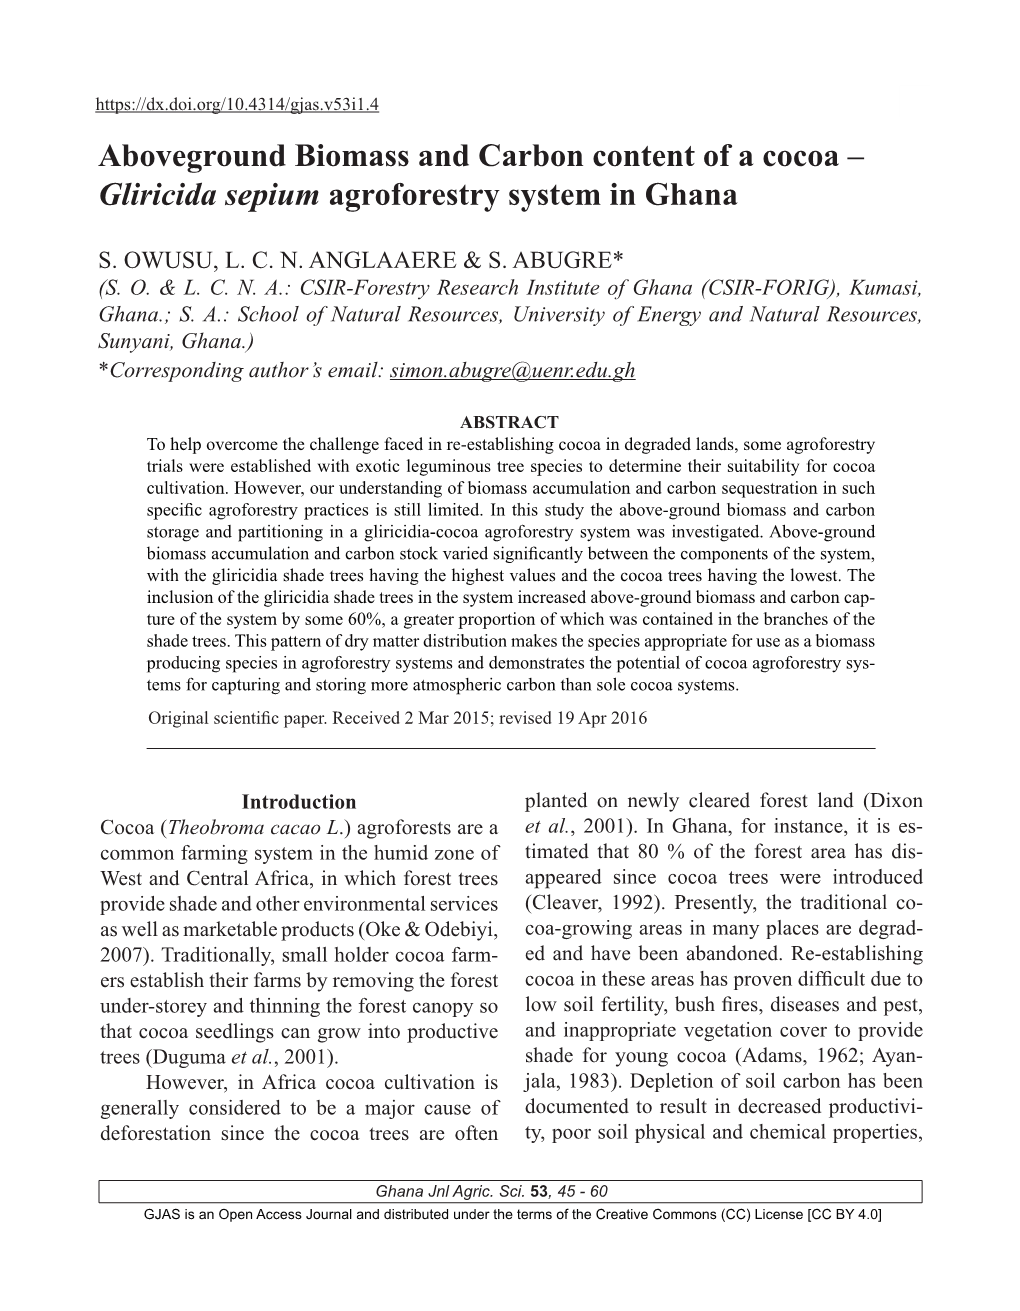 Aboveground Biomass and Carbon Content of a Cocoa – Gliricida Sepium Agroforestry System in Ghana